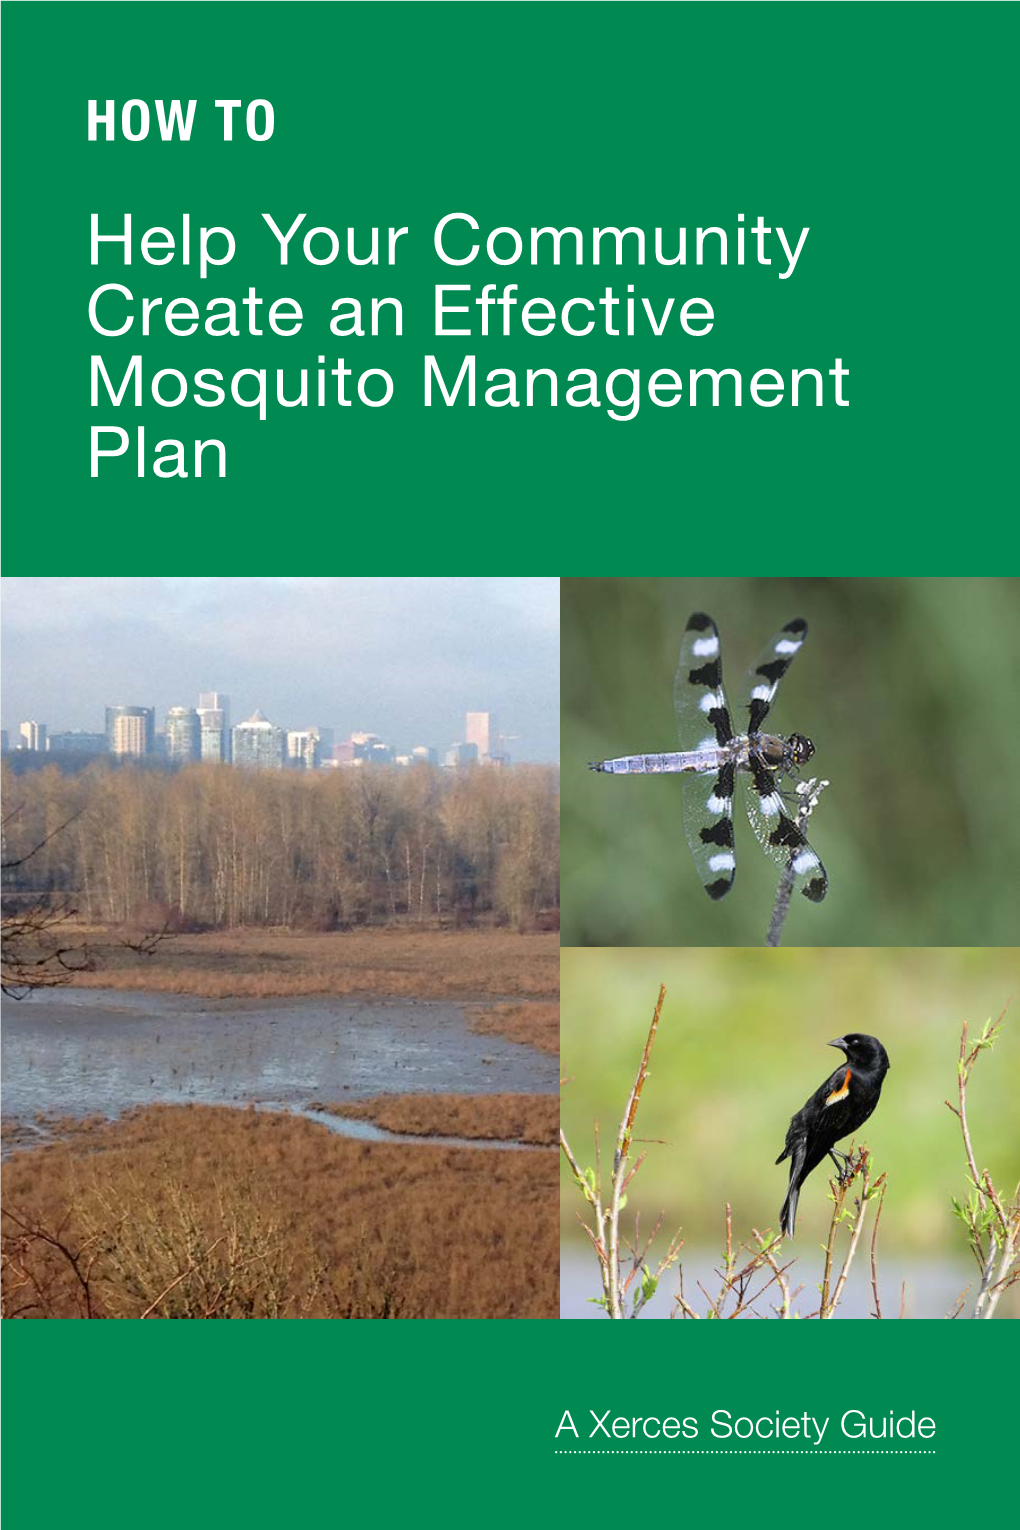 Help Your Community Create an Effective Mosquito Management Plan